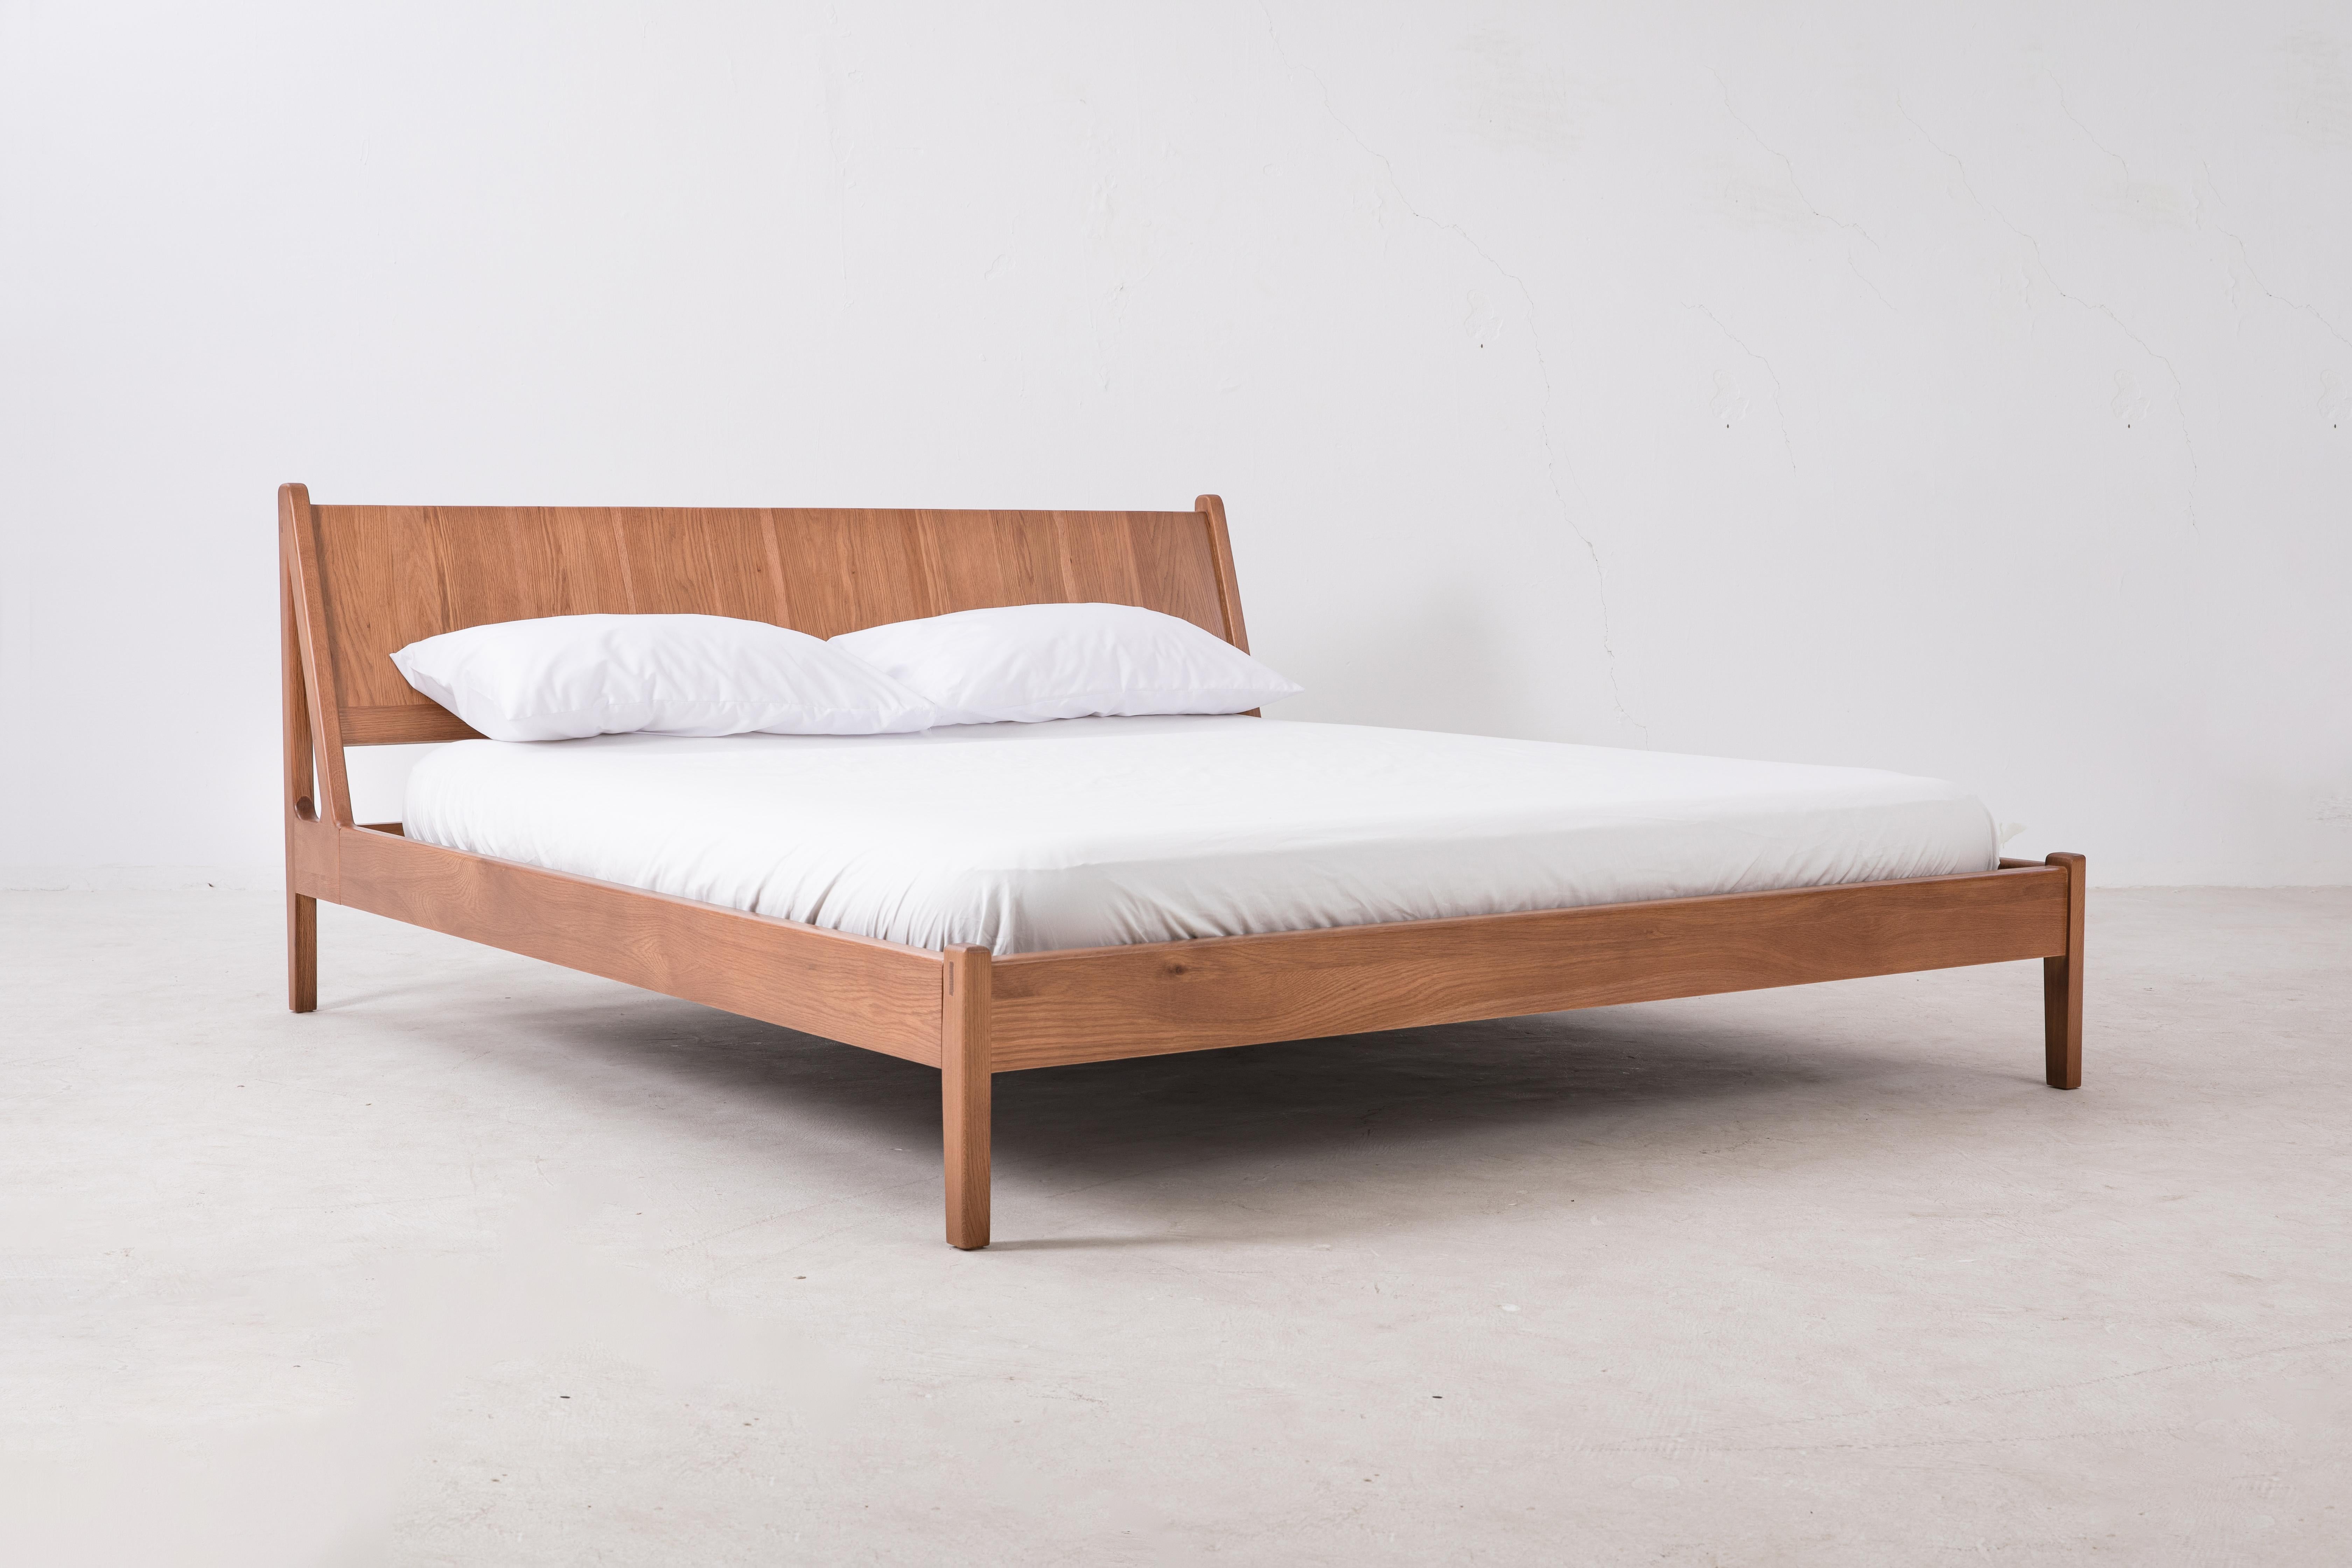 Sun at six is a contemporary furniture design studio working with traditional Chinese joinery masters to handcraft our pieces using traditional joinery. The wide paneled plume bed is modeled after our plume chair. The plume bed is both simple and